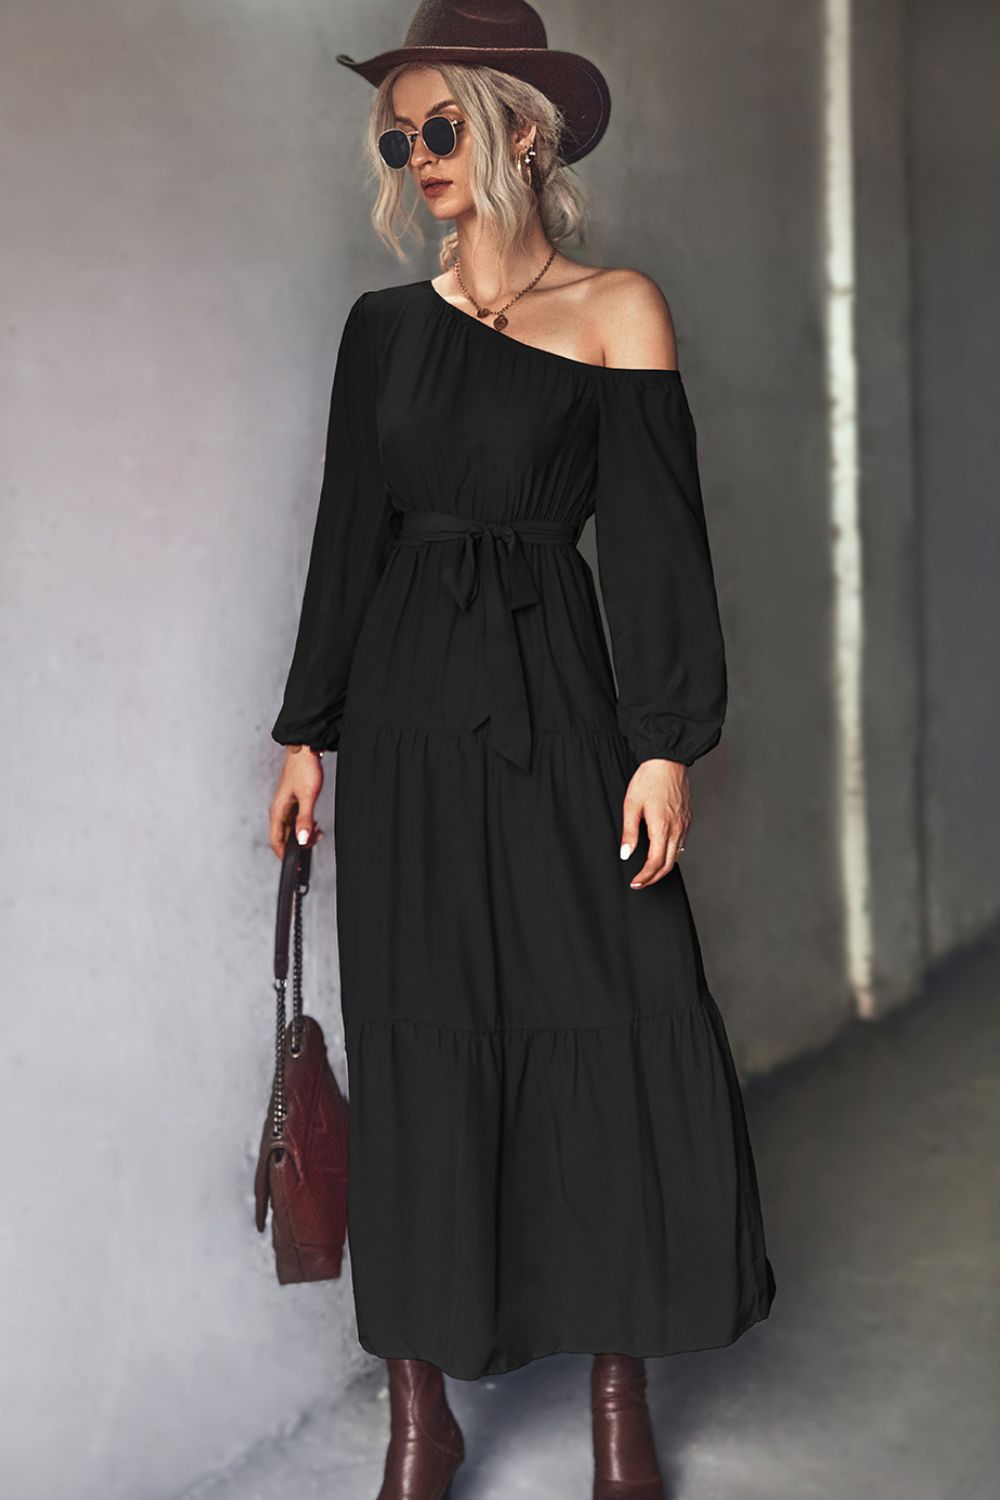 Belted One-Shoulder Tiered Maxi Dress - Black / S Apparel & Accessories Wynter 4 All Seasons